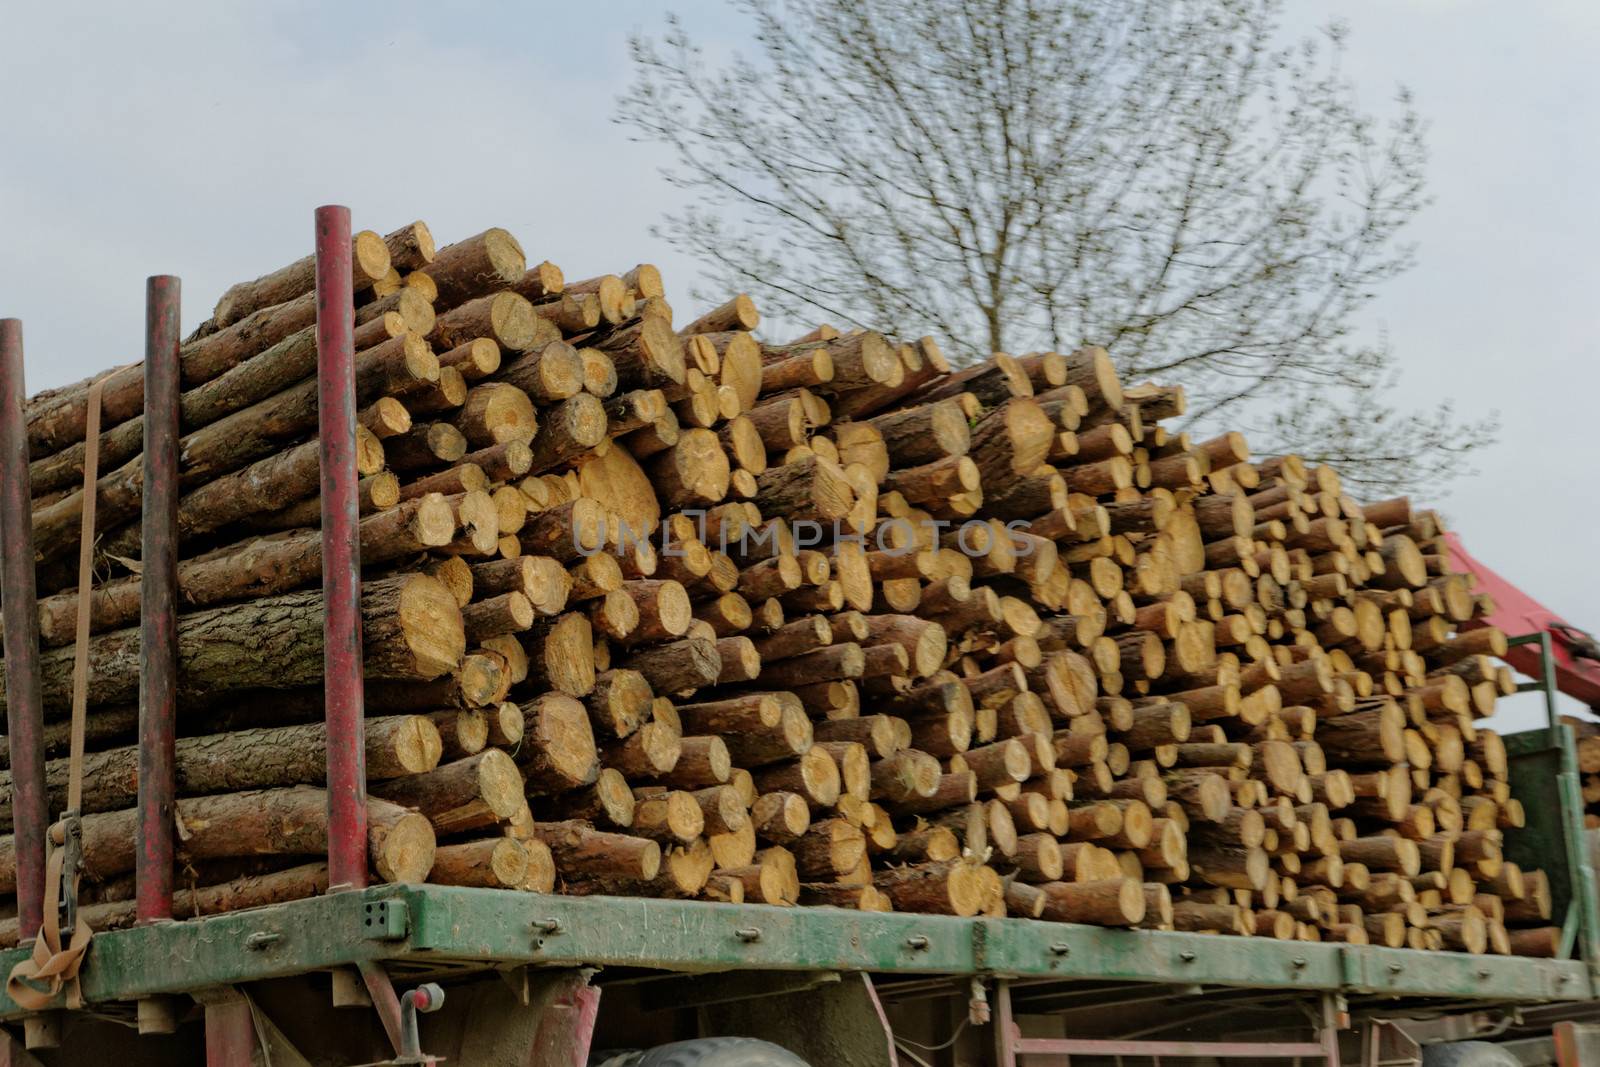 timber truck carrying by NagyDodo